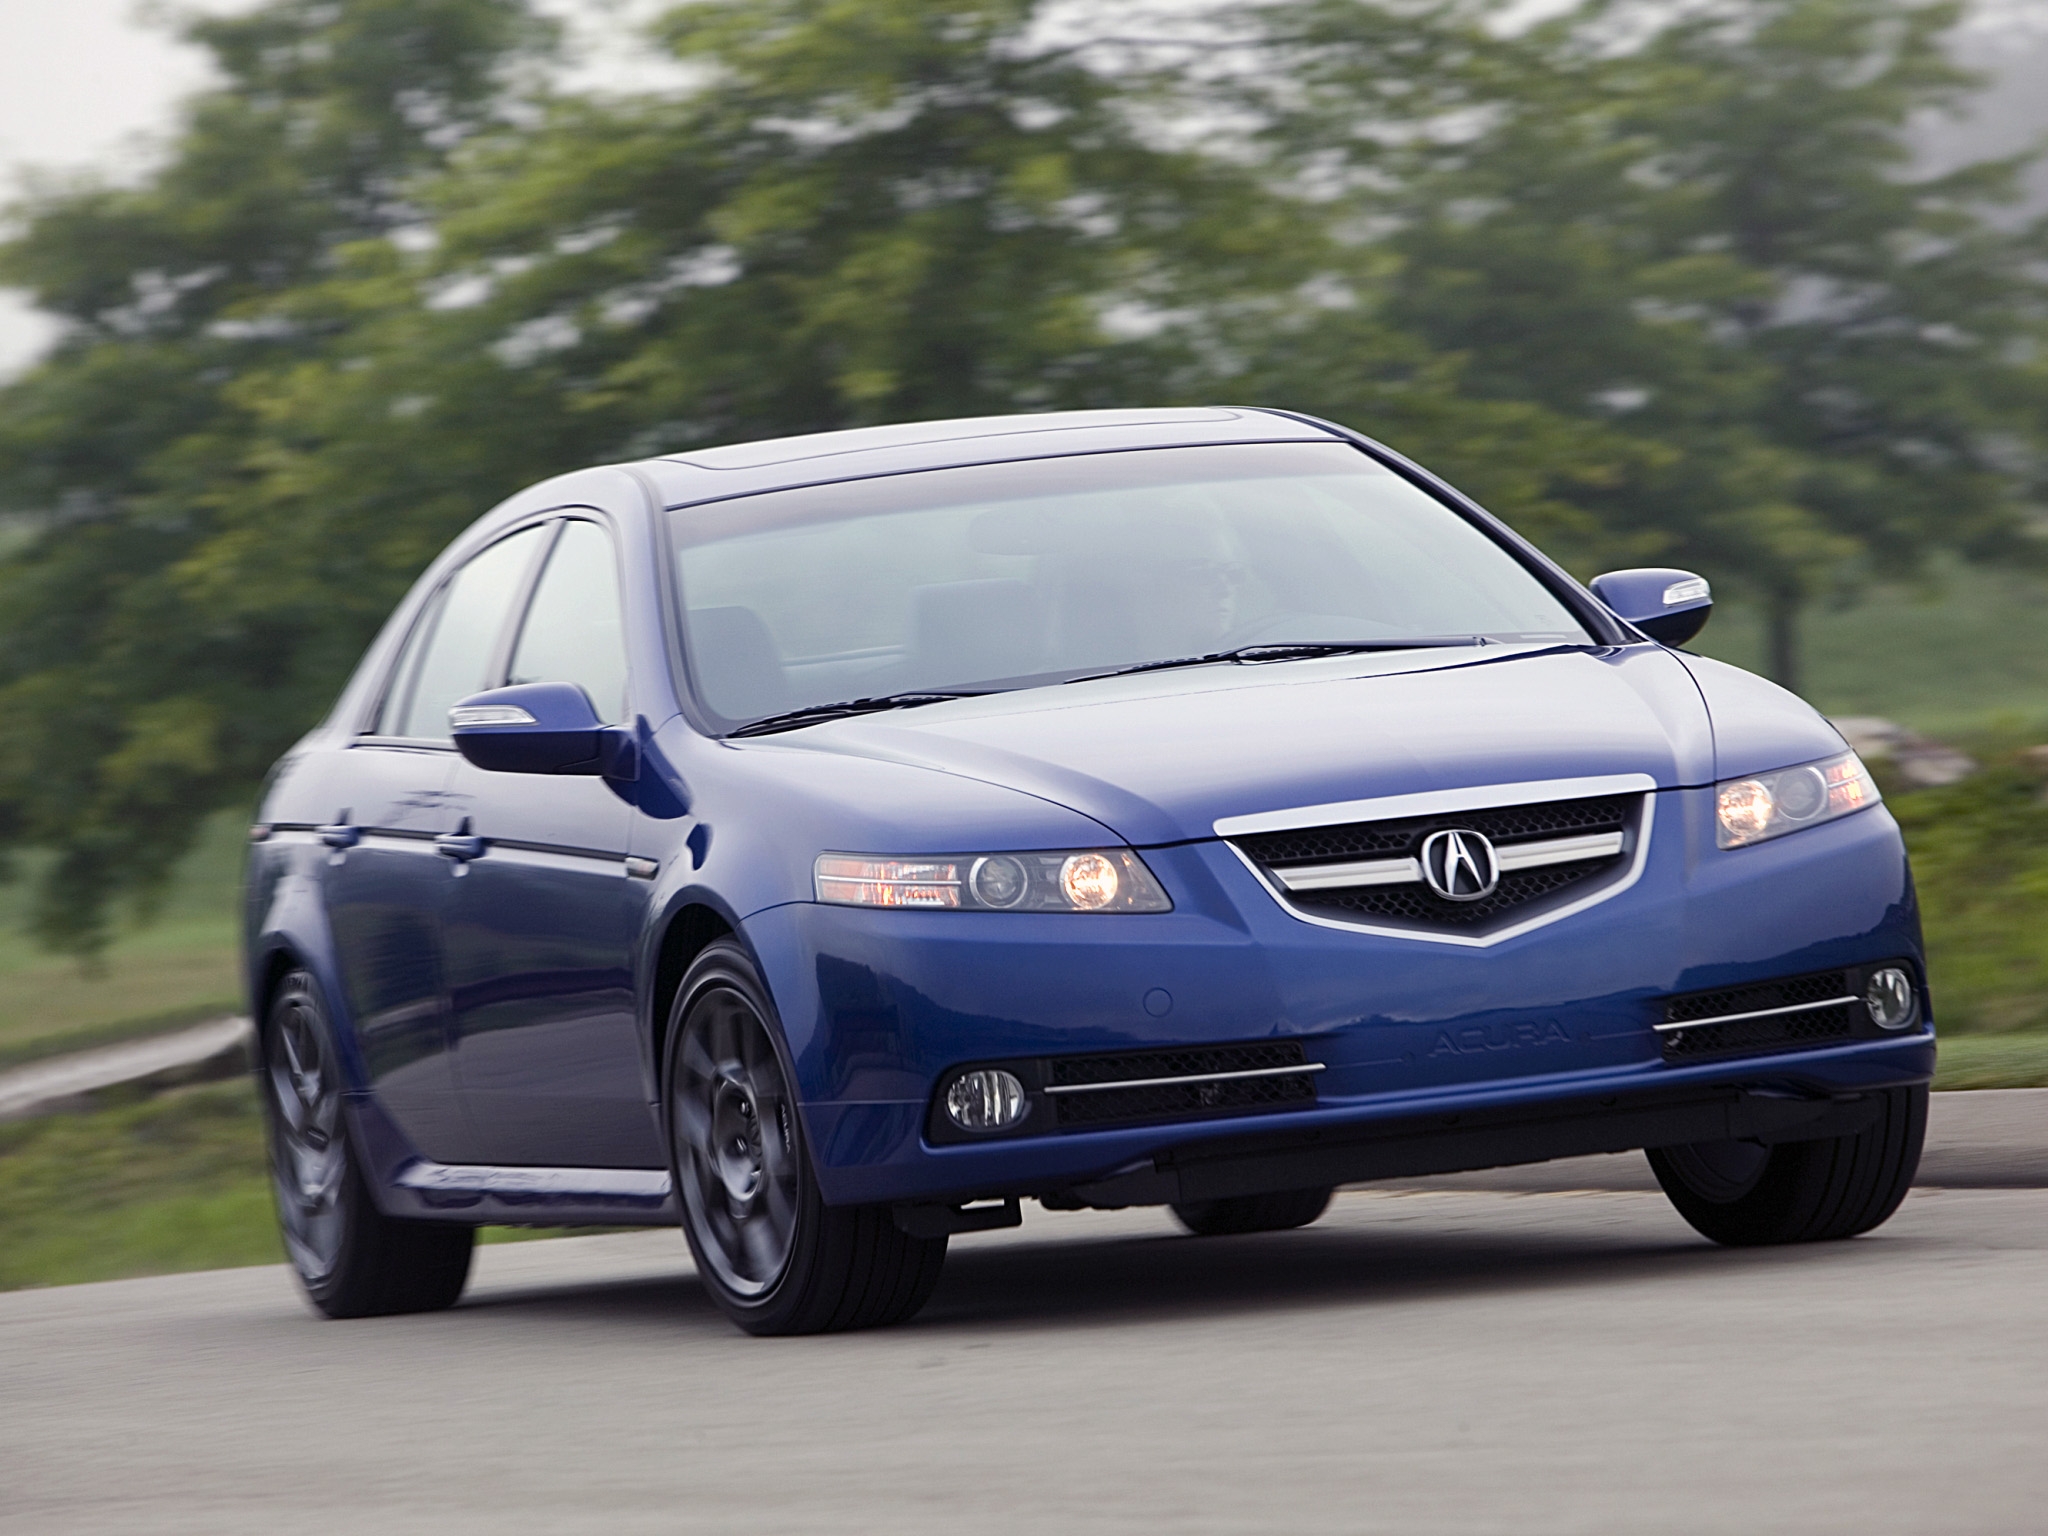 Cool Wallpapers auto, trees, grass, acura, cars, blue, asphalt, front view, speed, style, akura, tl, 2007